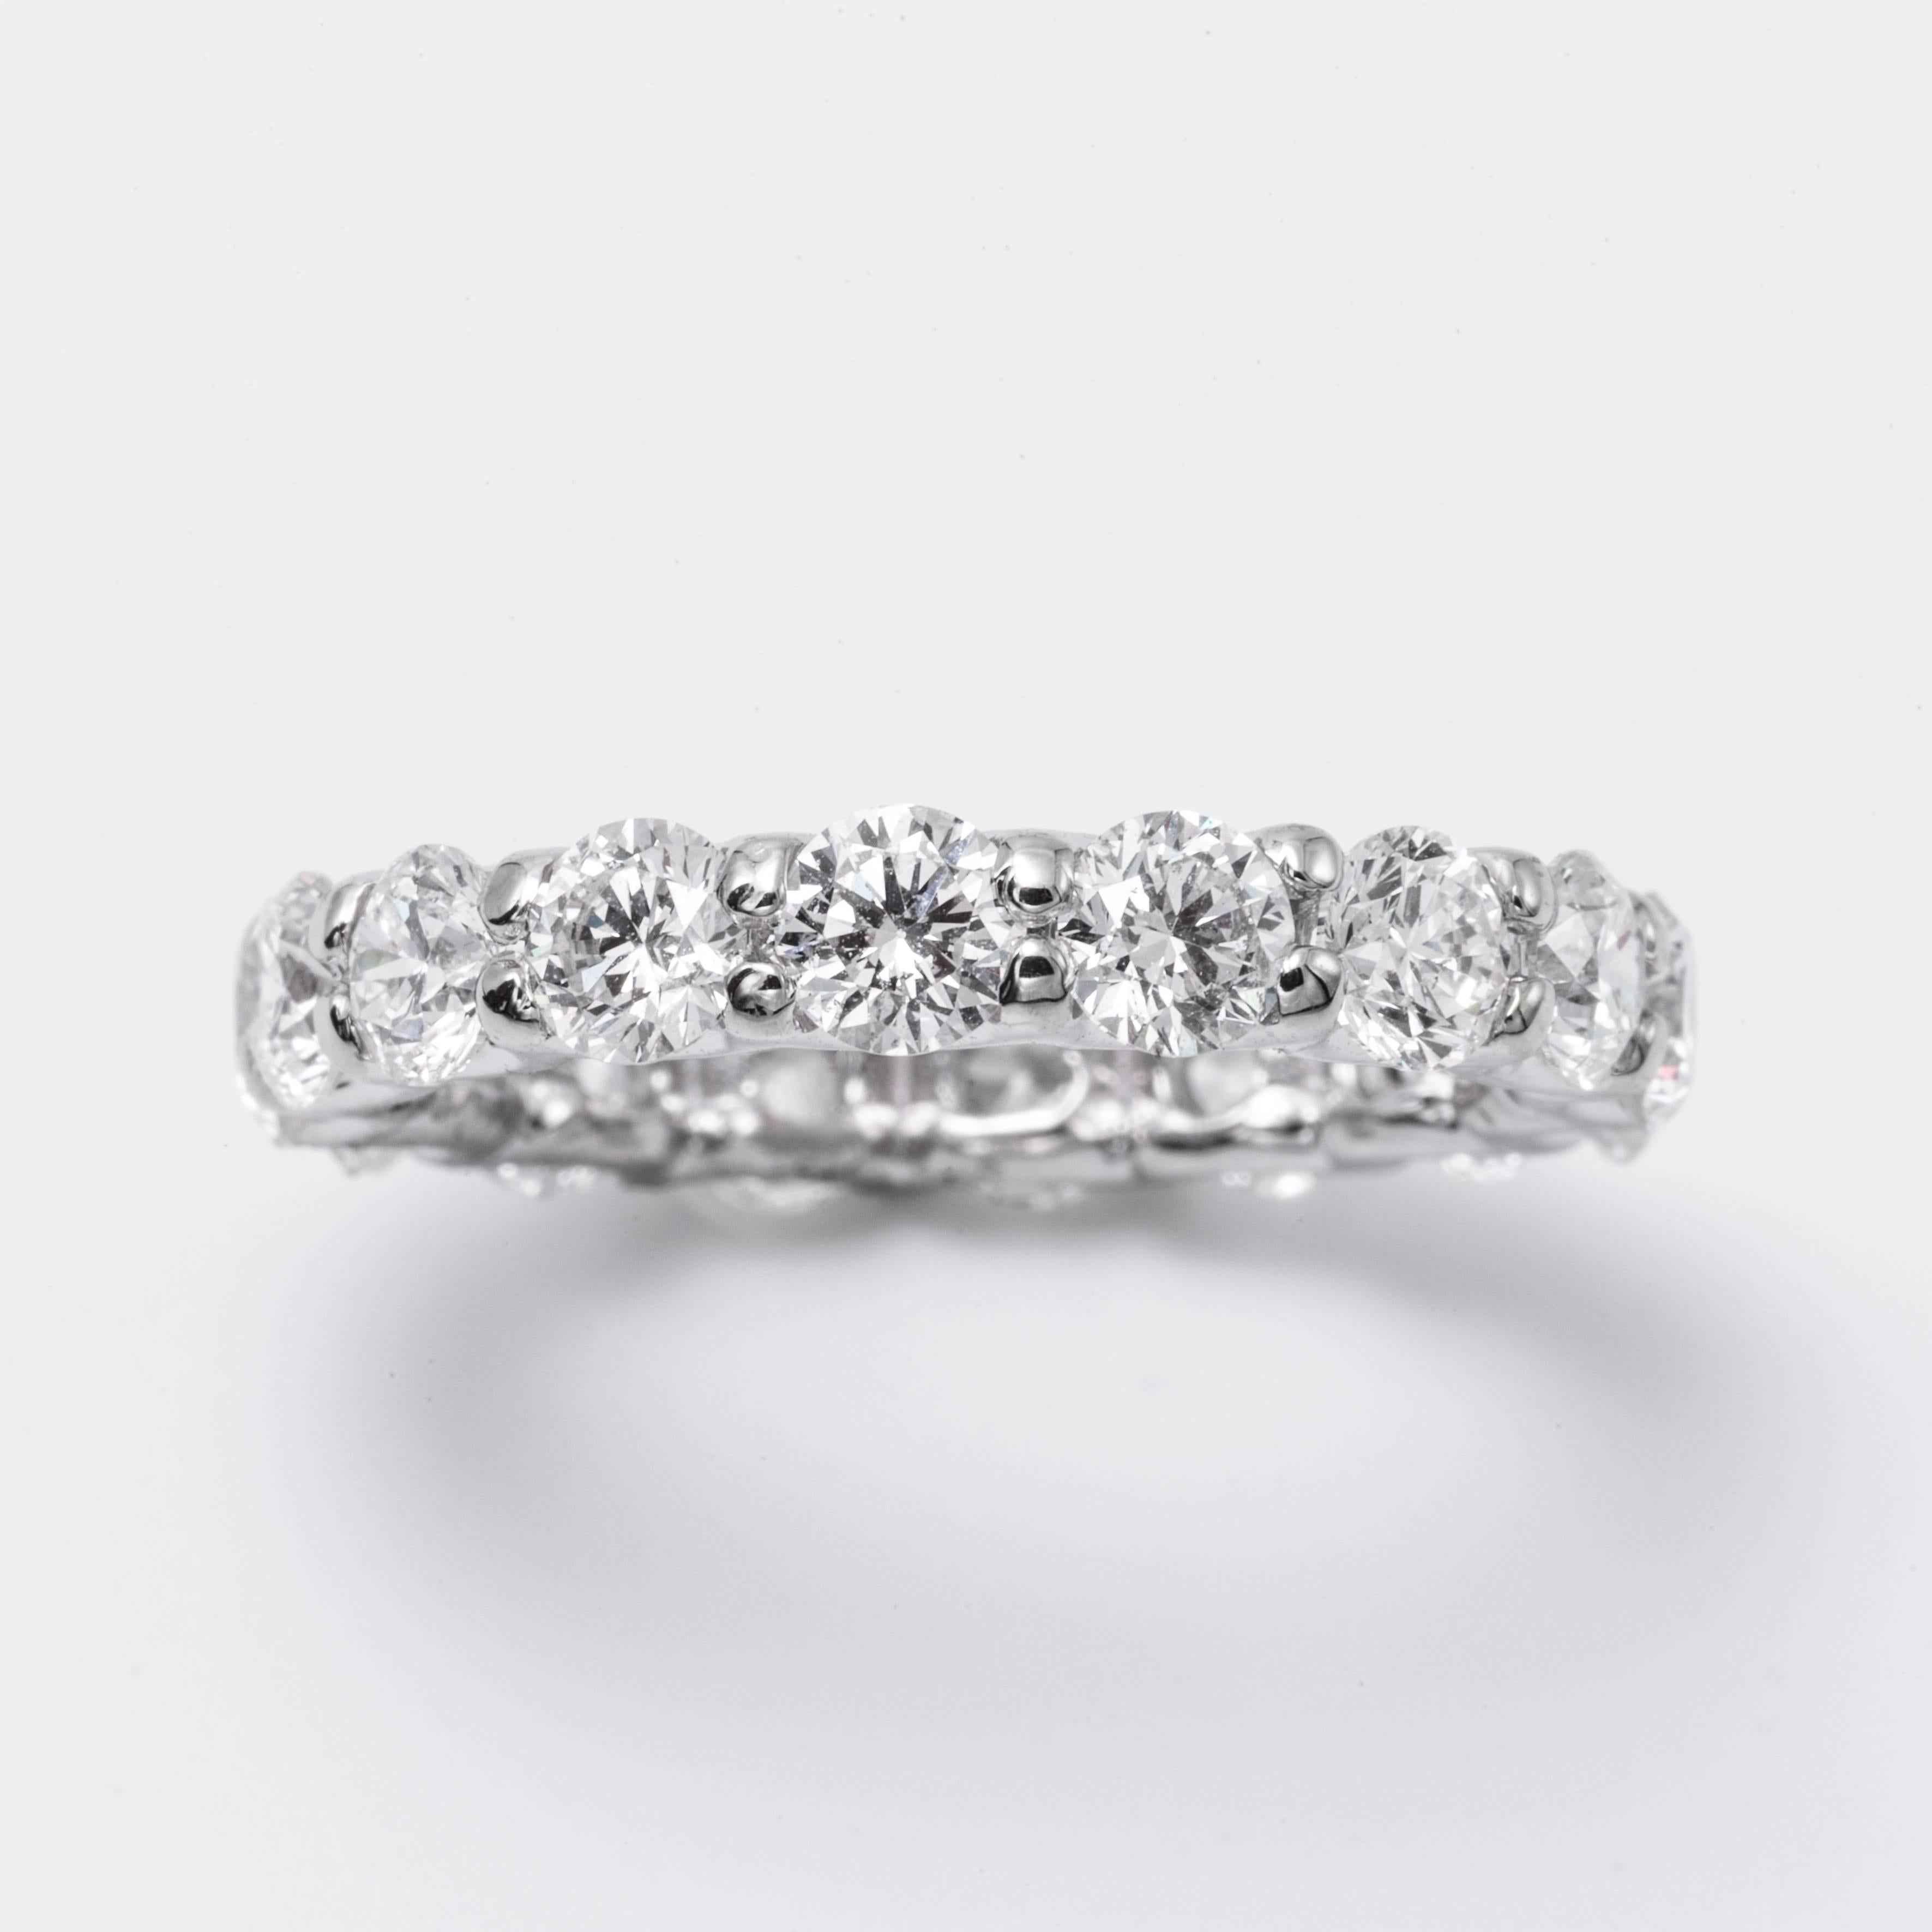 U Setting
14K White Gold 
Diamond Weight: 2.00
Diamond Color: H
Diamond Clarity: SI1
Beautifully sculpted, this diamond ring is crafted in a 14k eternity band design featuring brilliant round diamonds. Total carat weight may vary by ring size.